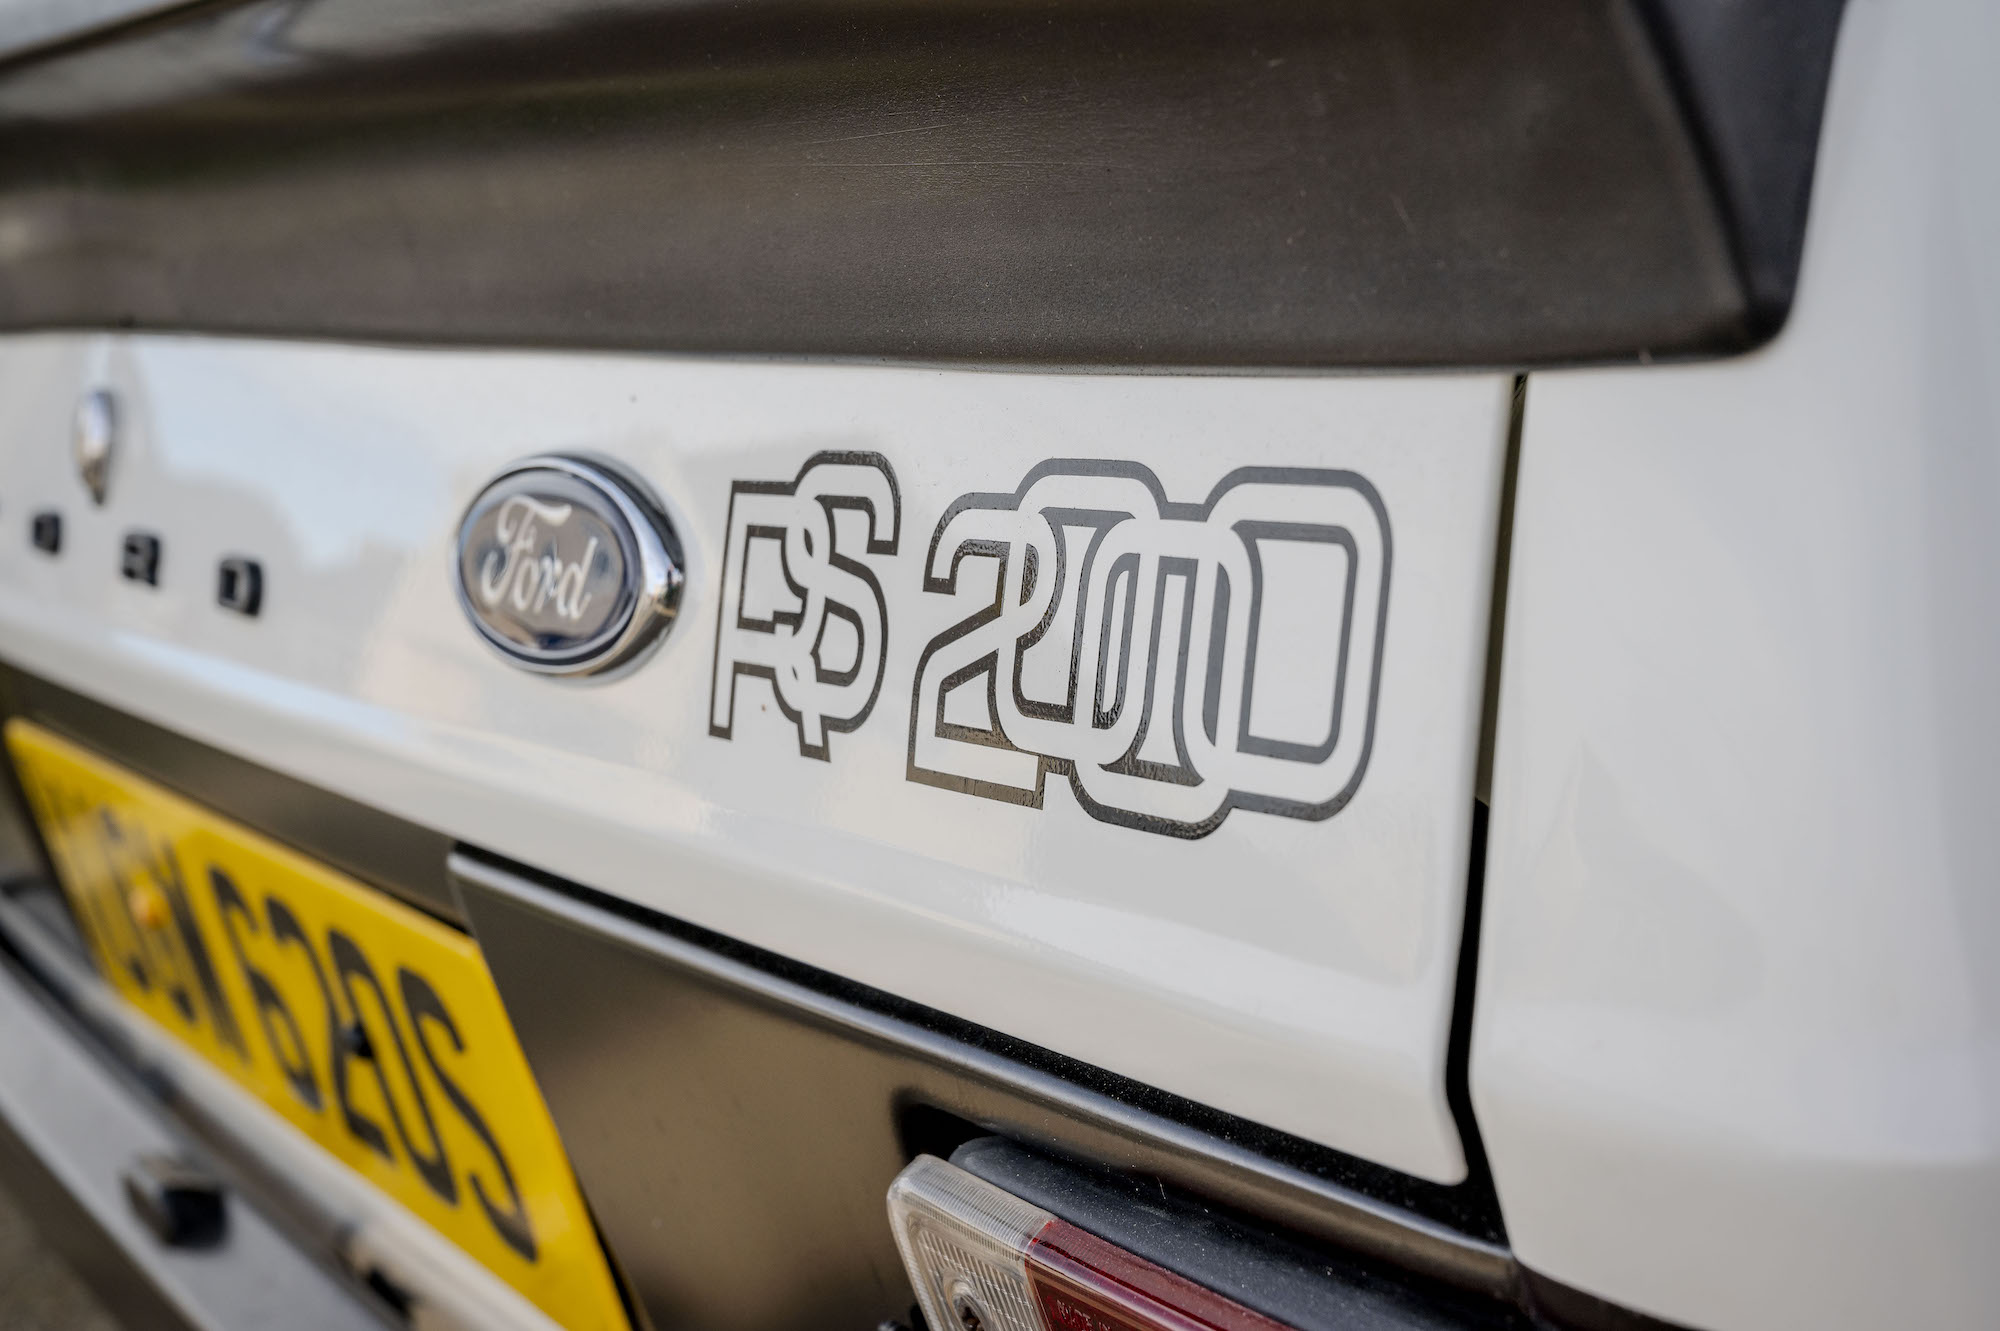 RS2000 boot sticker